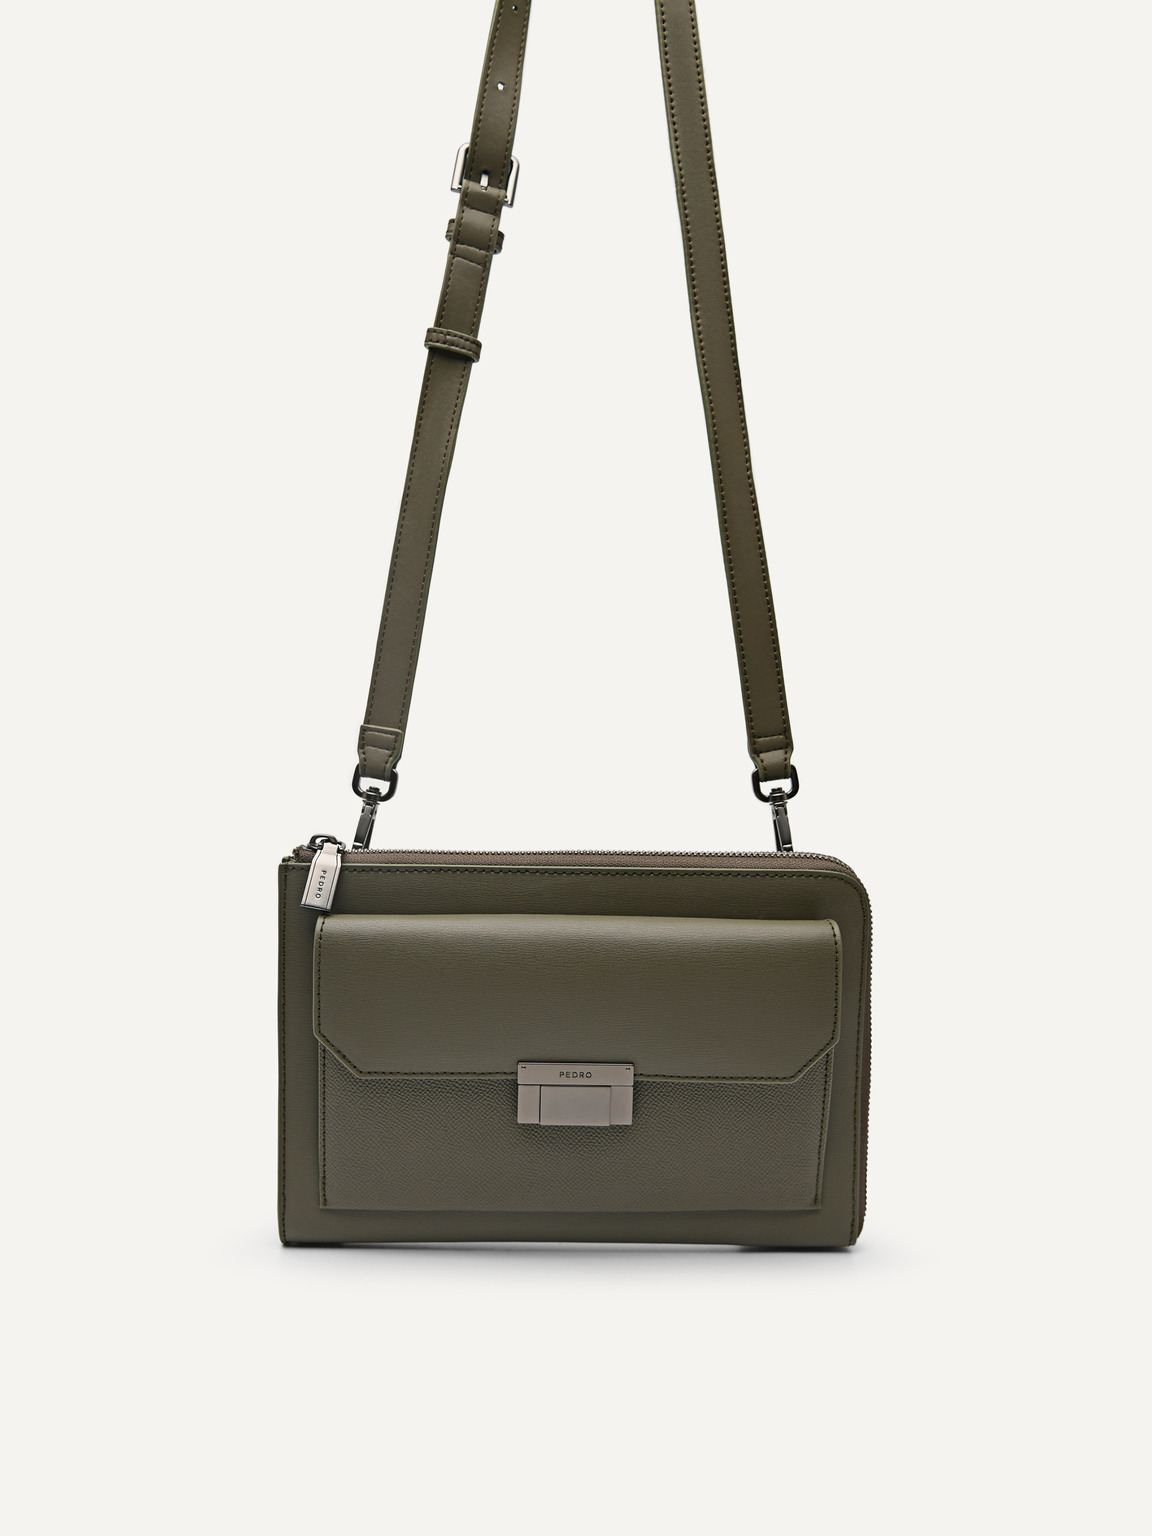 Henry Leather Clutch Bag, Military Green